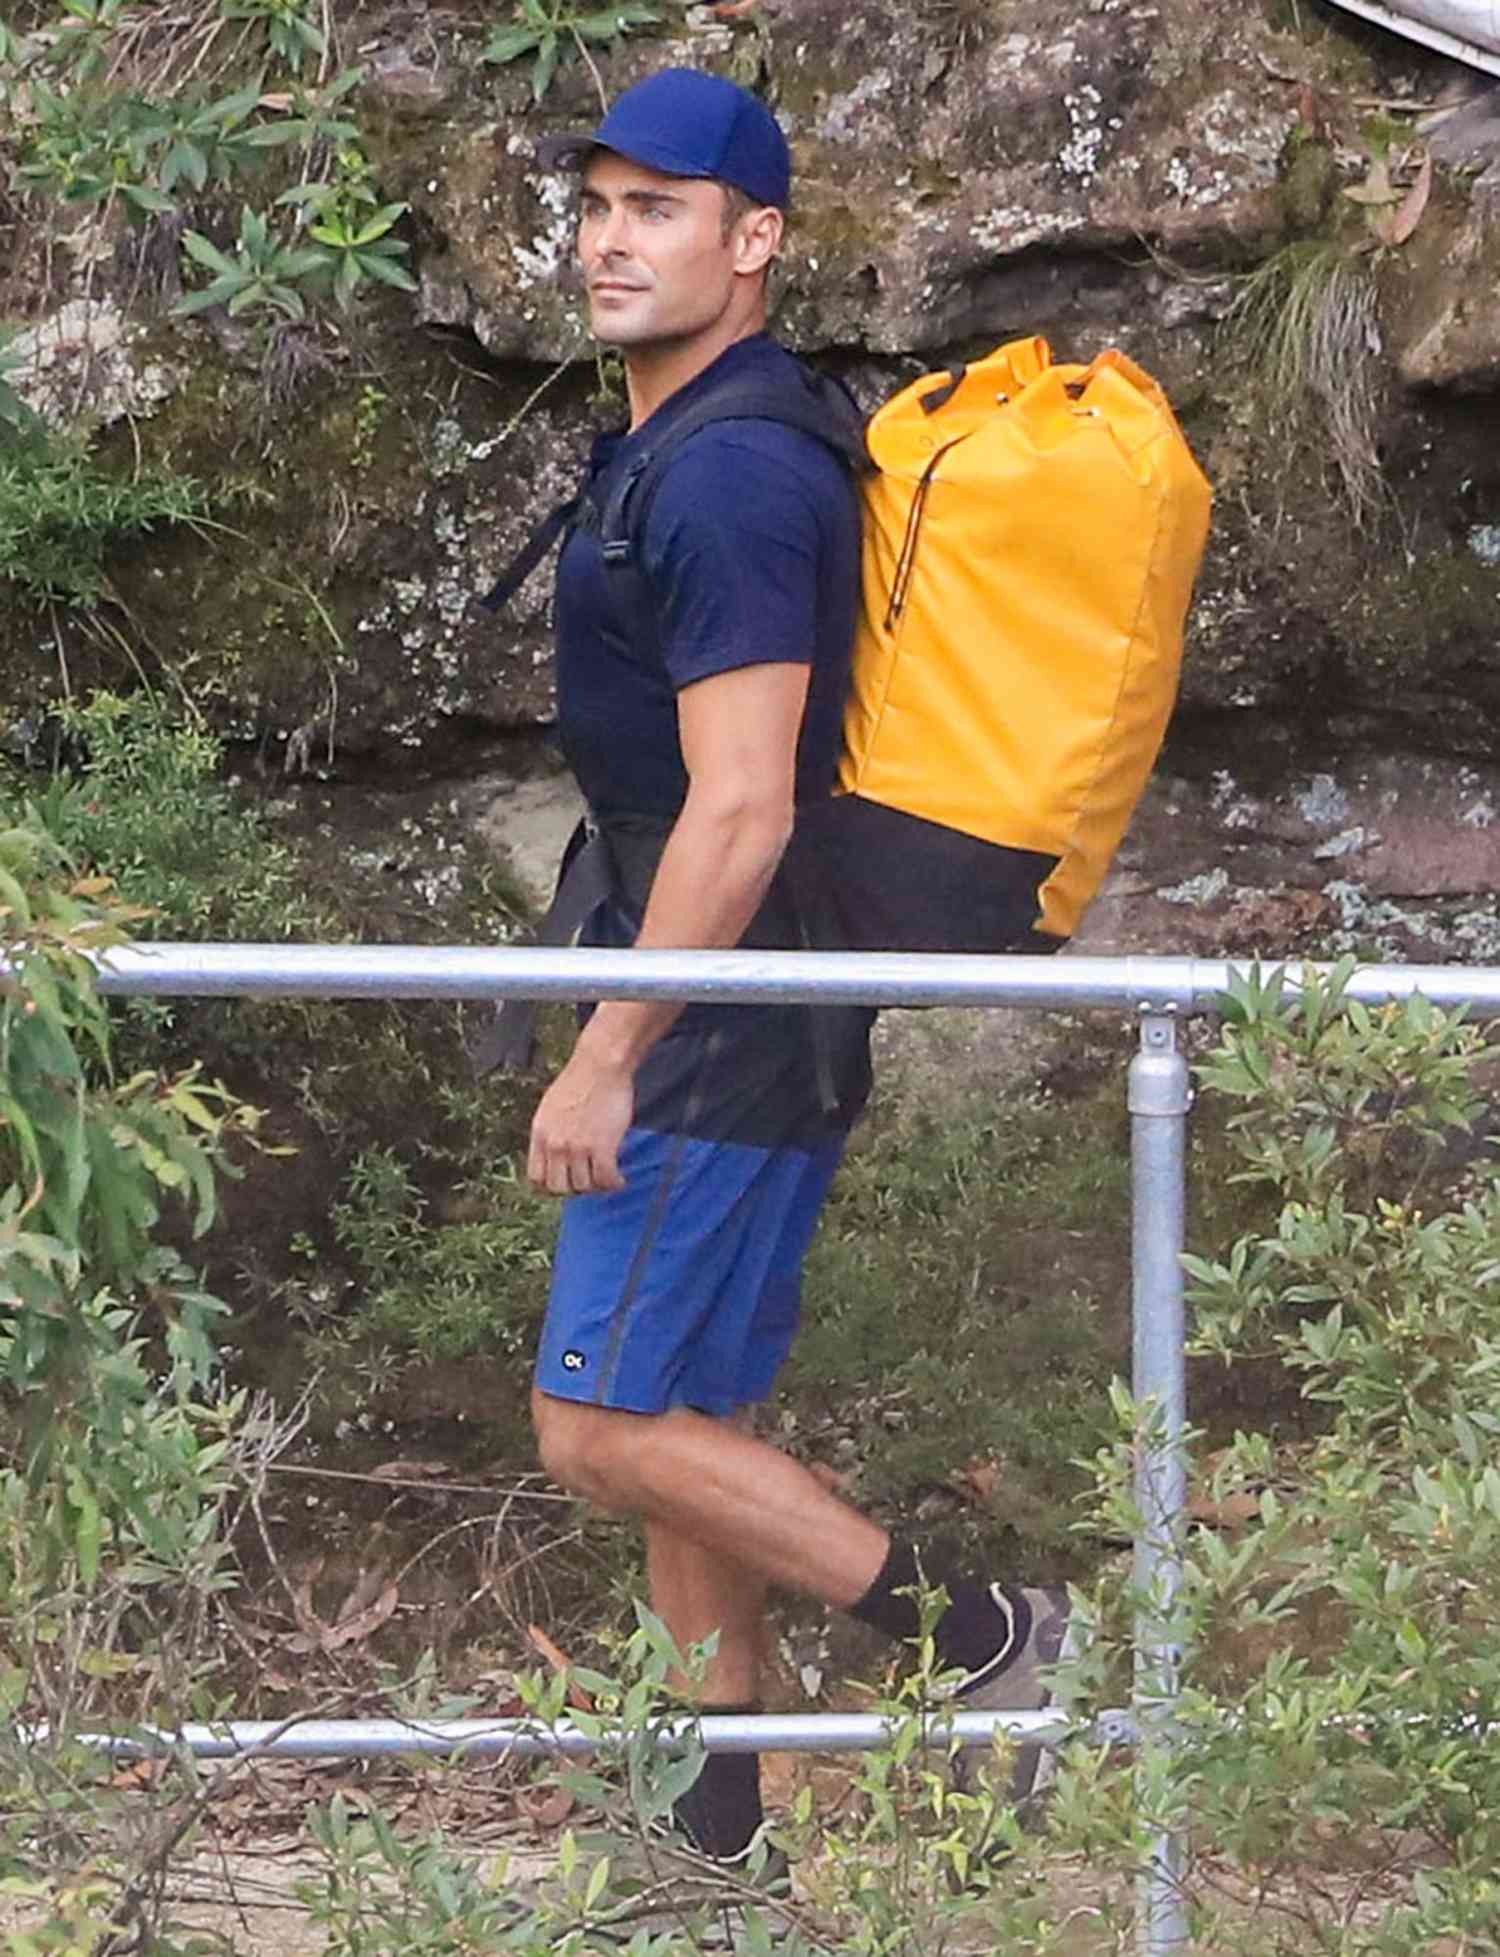 Zac Efron goes on an abseiling adventure at Katoomba in the NSW Blue Mountains